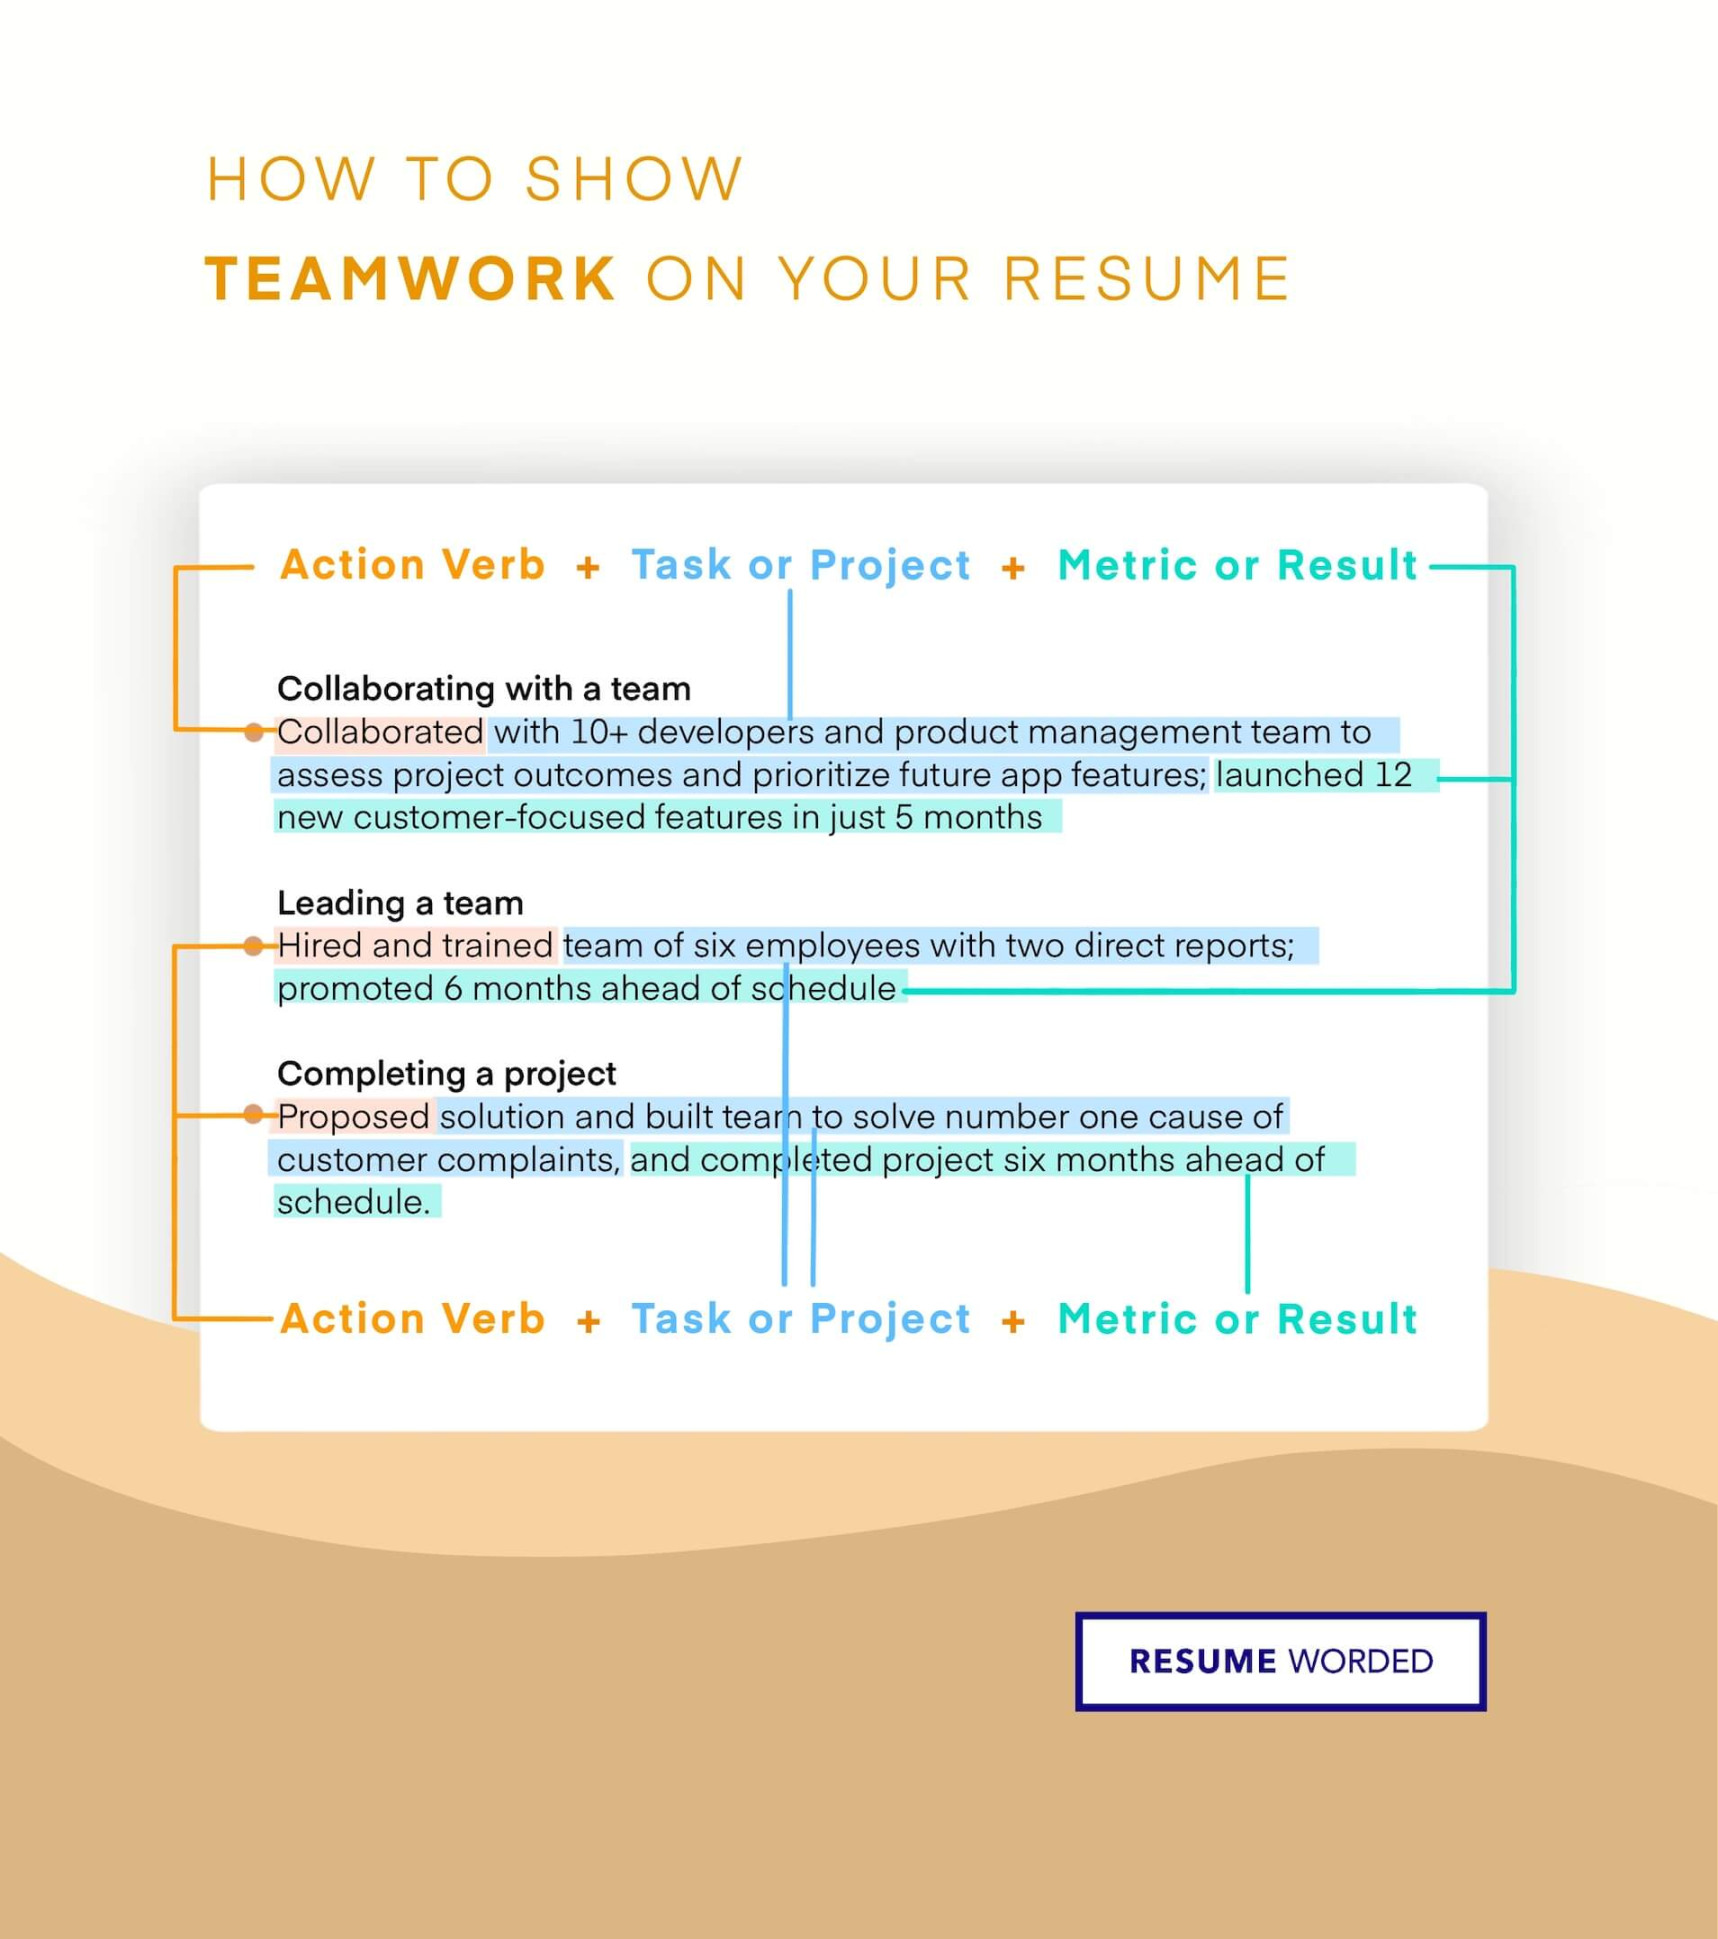 how to demonstrate teamwork on your resume